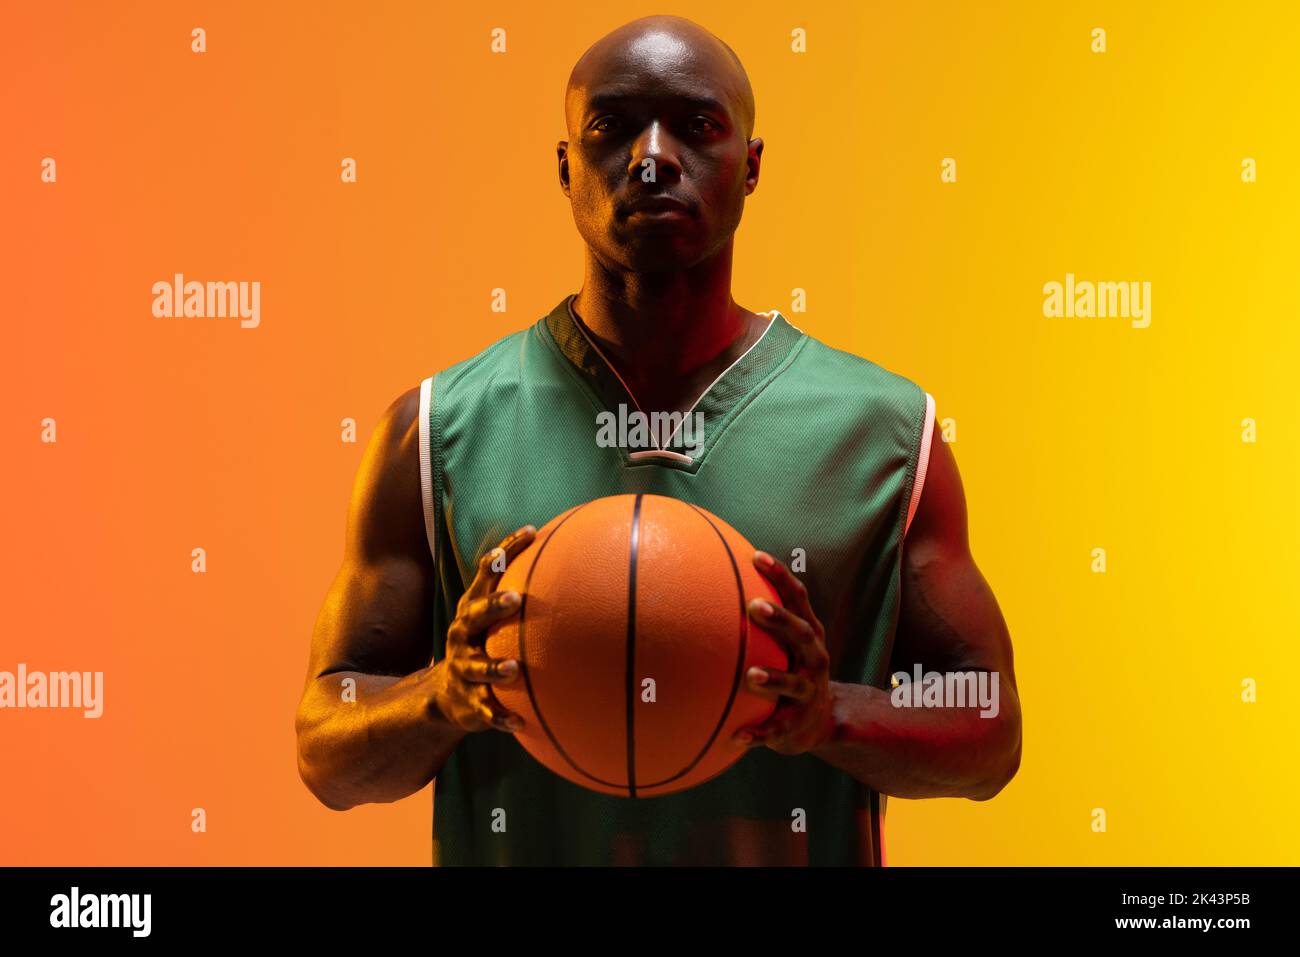 Image of portrait of african american basketball player with basketball on neon orange background. Sports and competition concept. Stock Photo